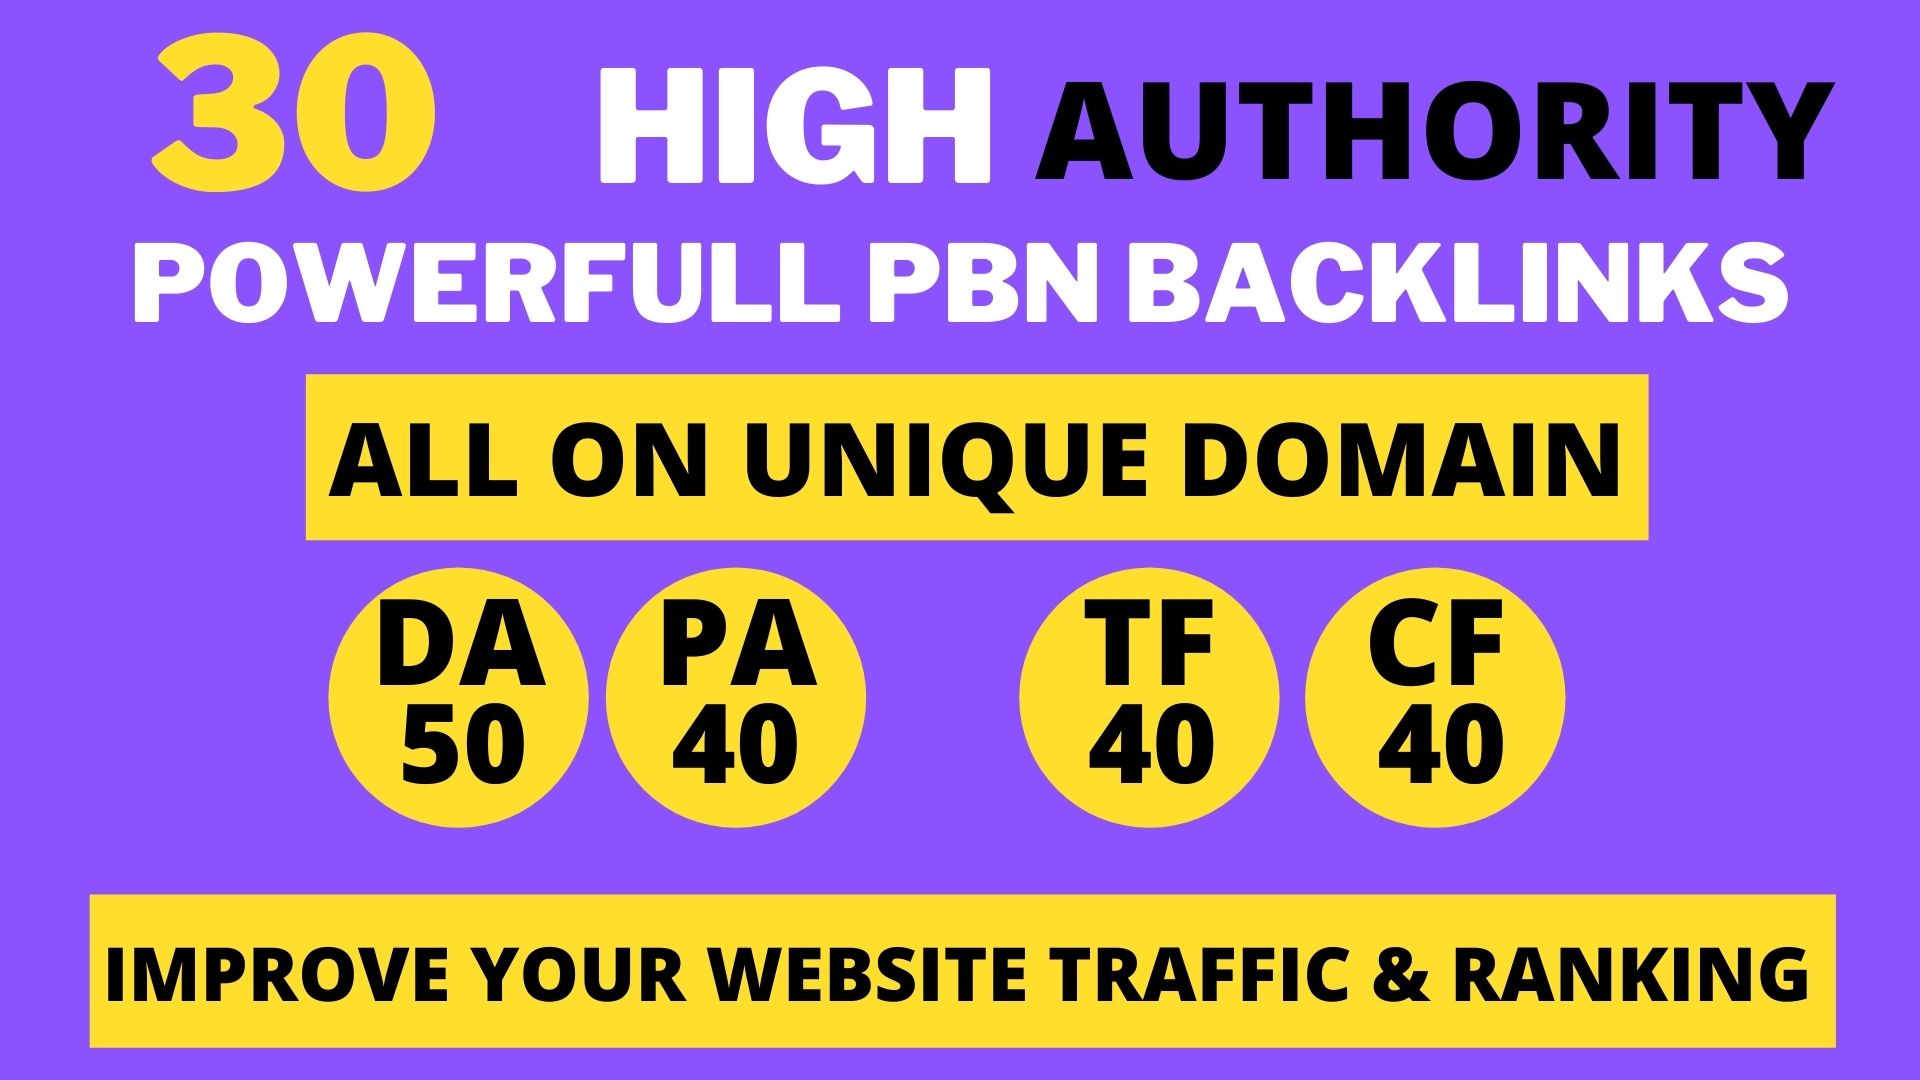 Get powerfull 30+ pbn backlink with high DA/PA/TF/CF on your homepage with unique website